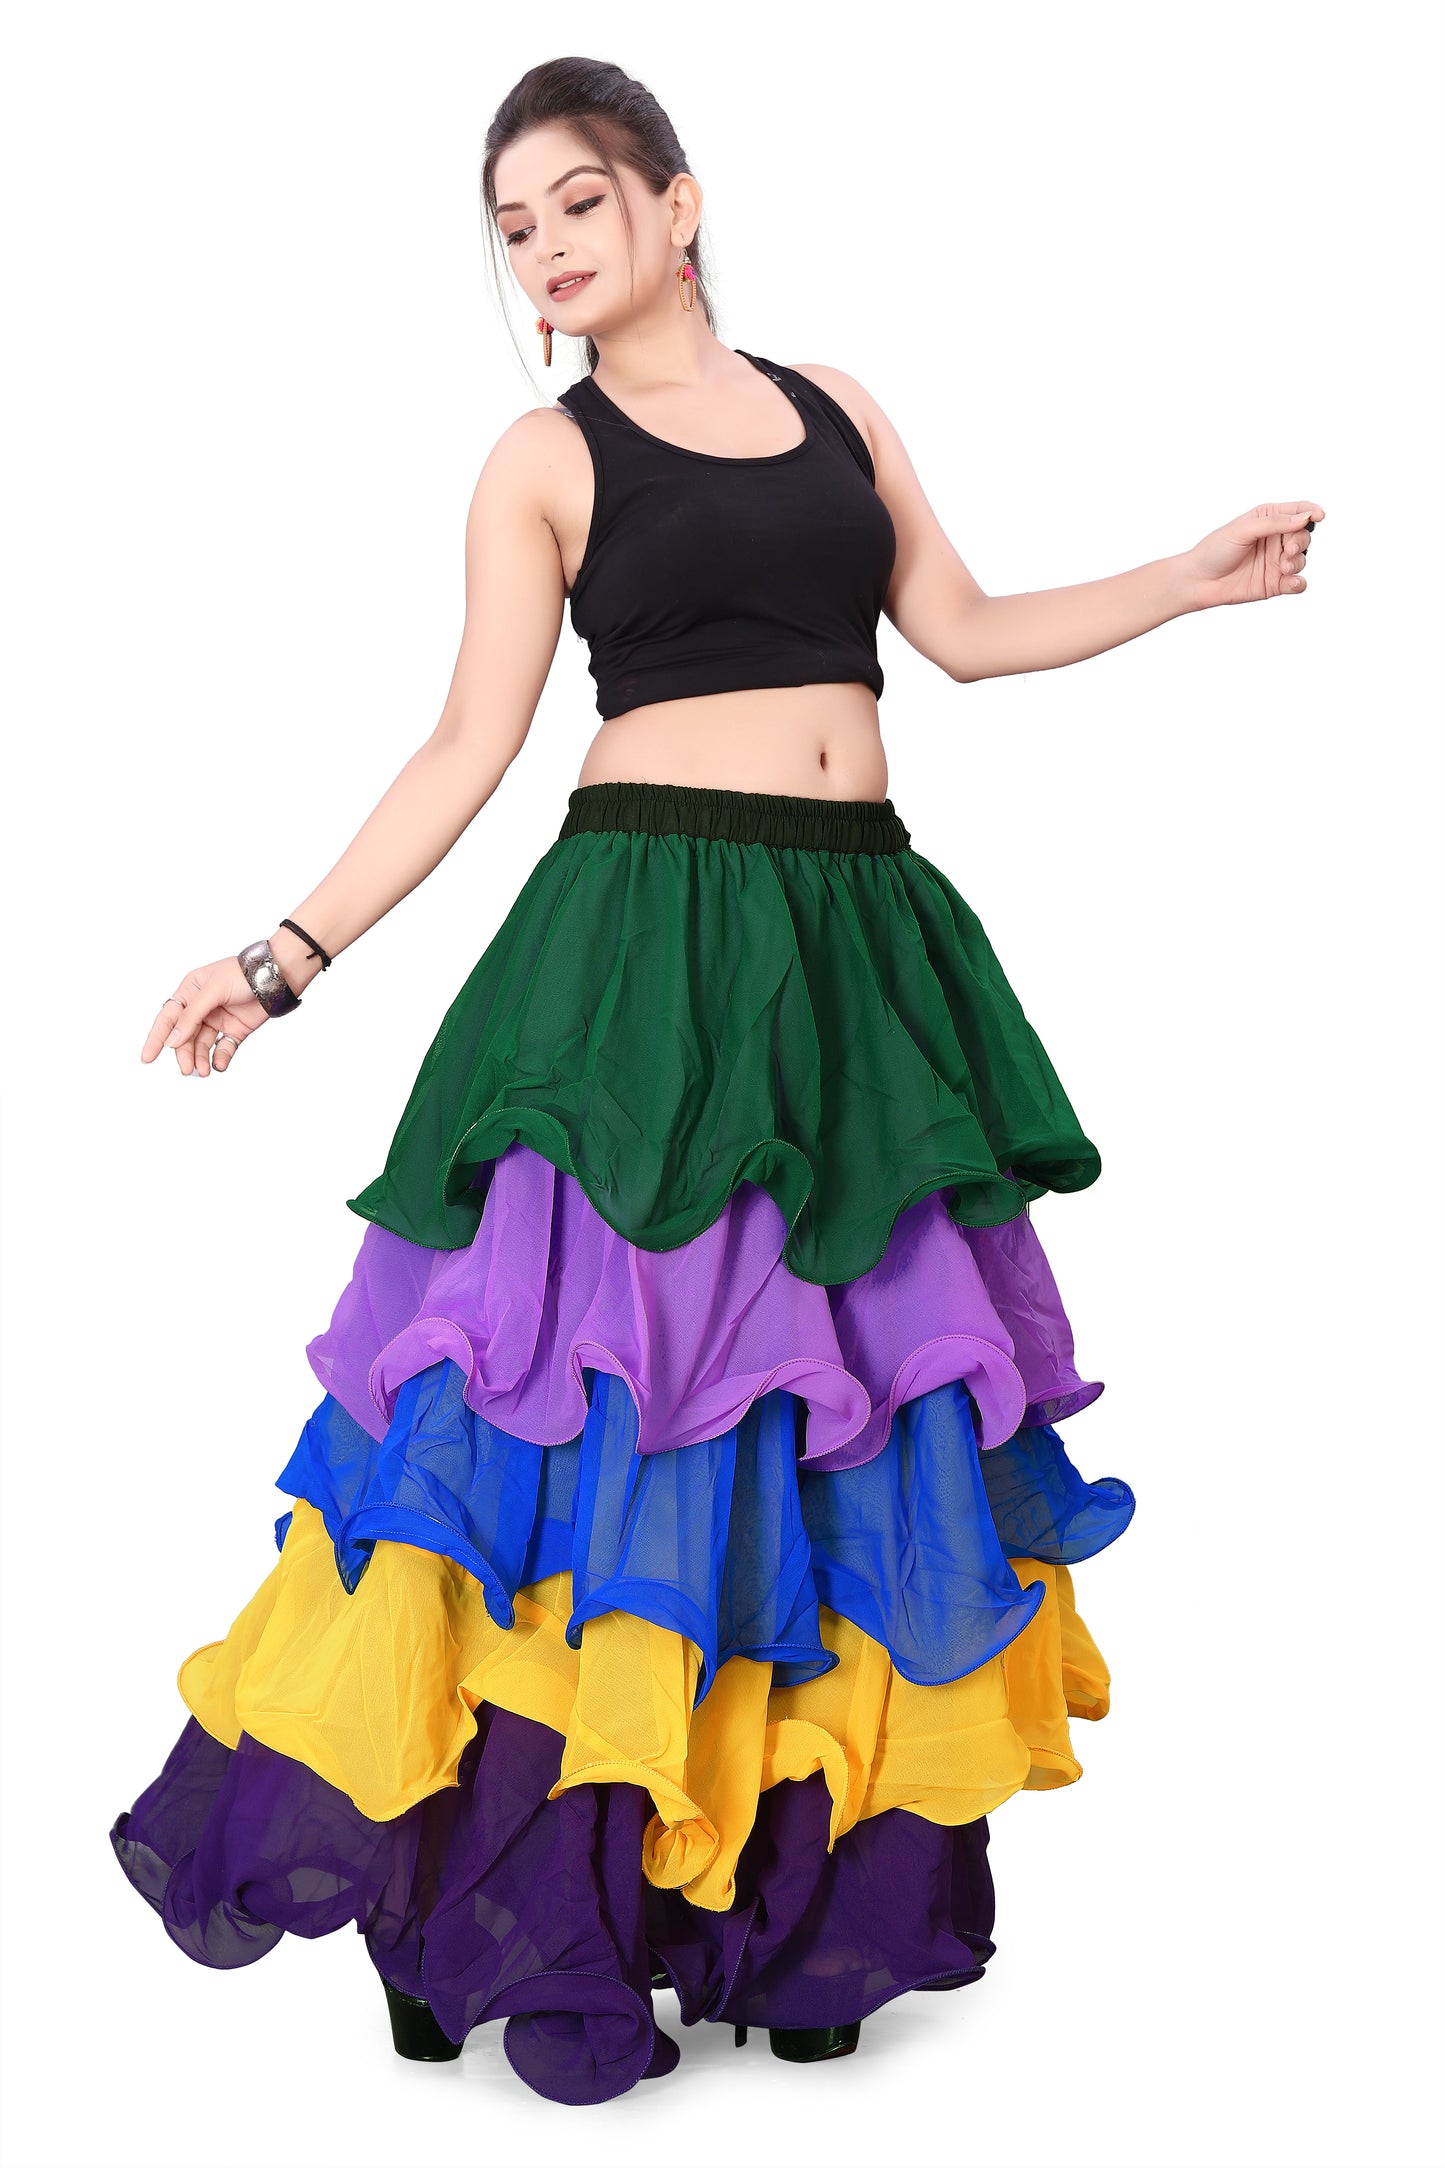 Chiffon Multi Color 5 Layer Belly Dance skirt C28- All Size